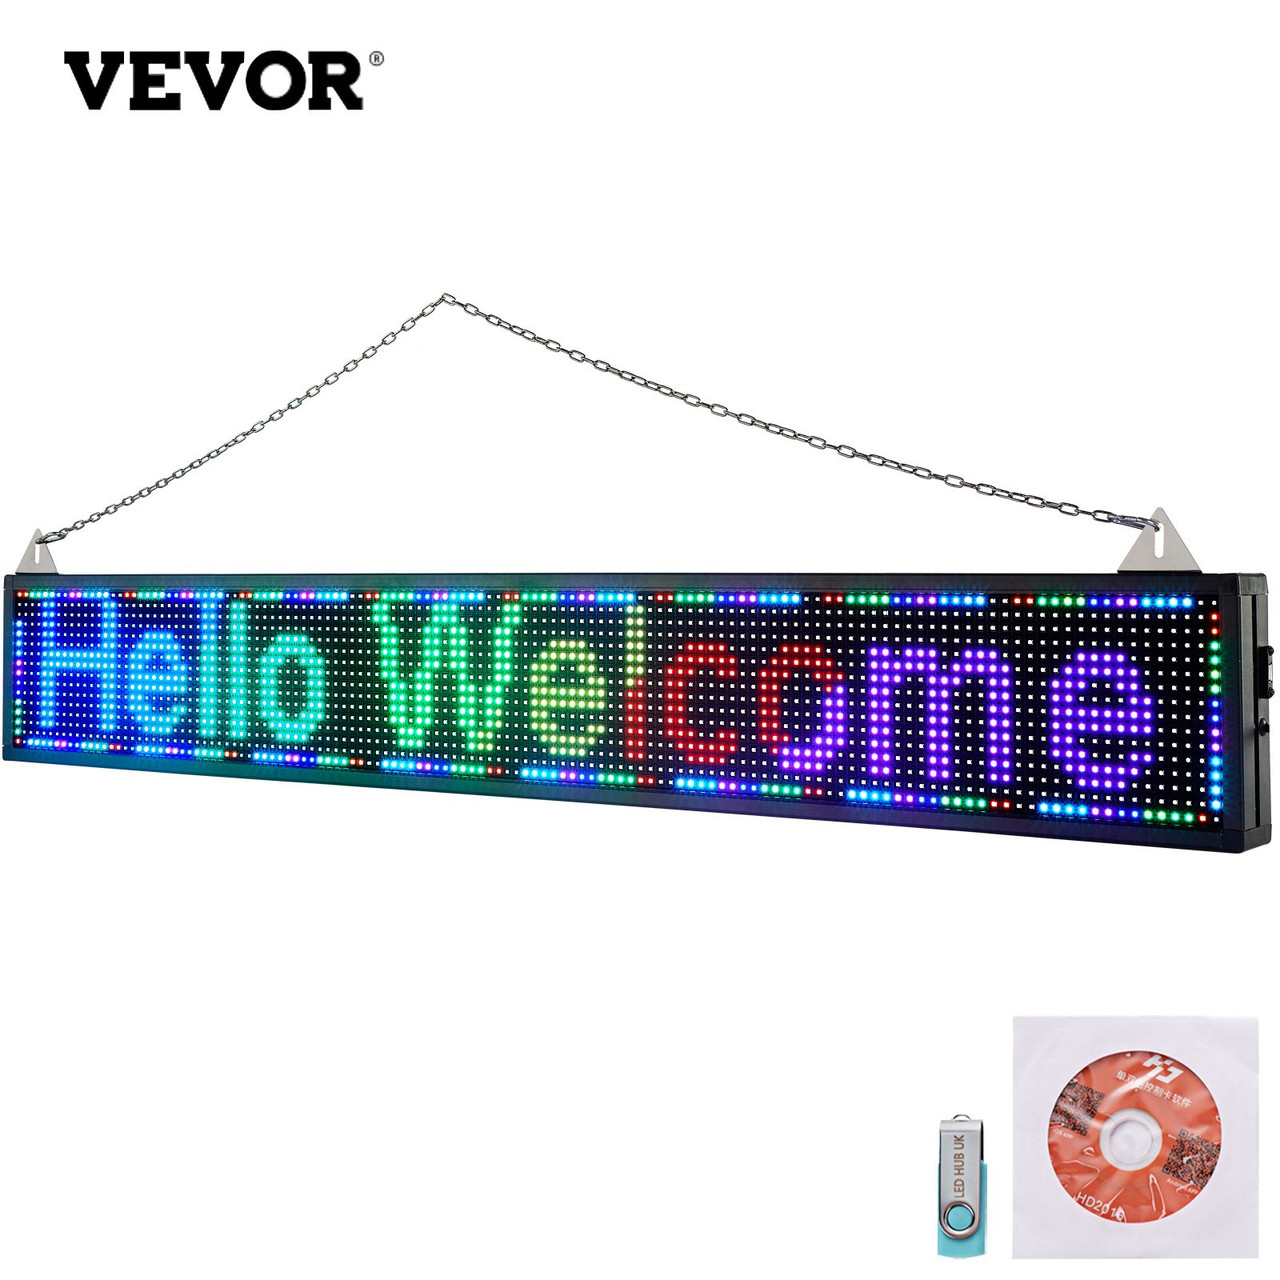 LED Scrolling Sign, 52" x 8" WiFi & USB Control, Full Color P10 Programmable Display, Indoor High Resolution Message Board, High Brightness Electronic Sign, Perfect Solution for Advertising